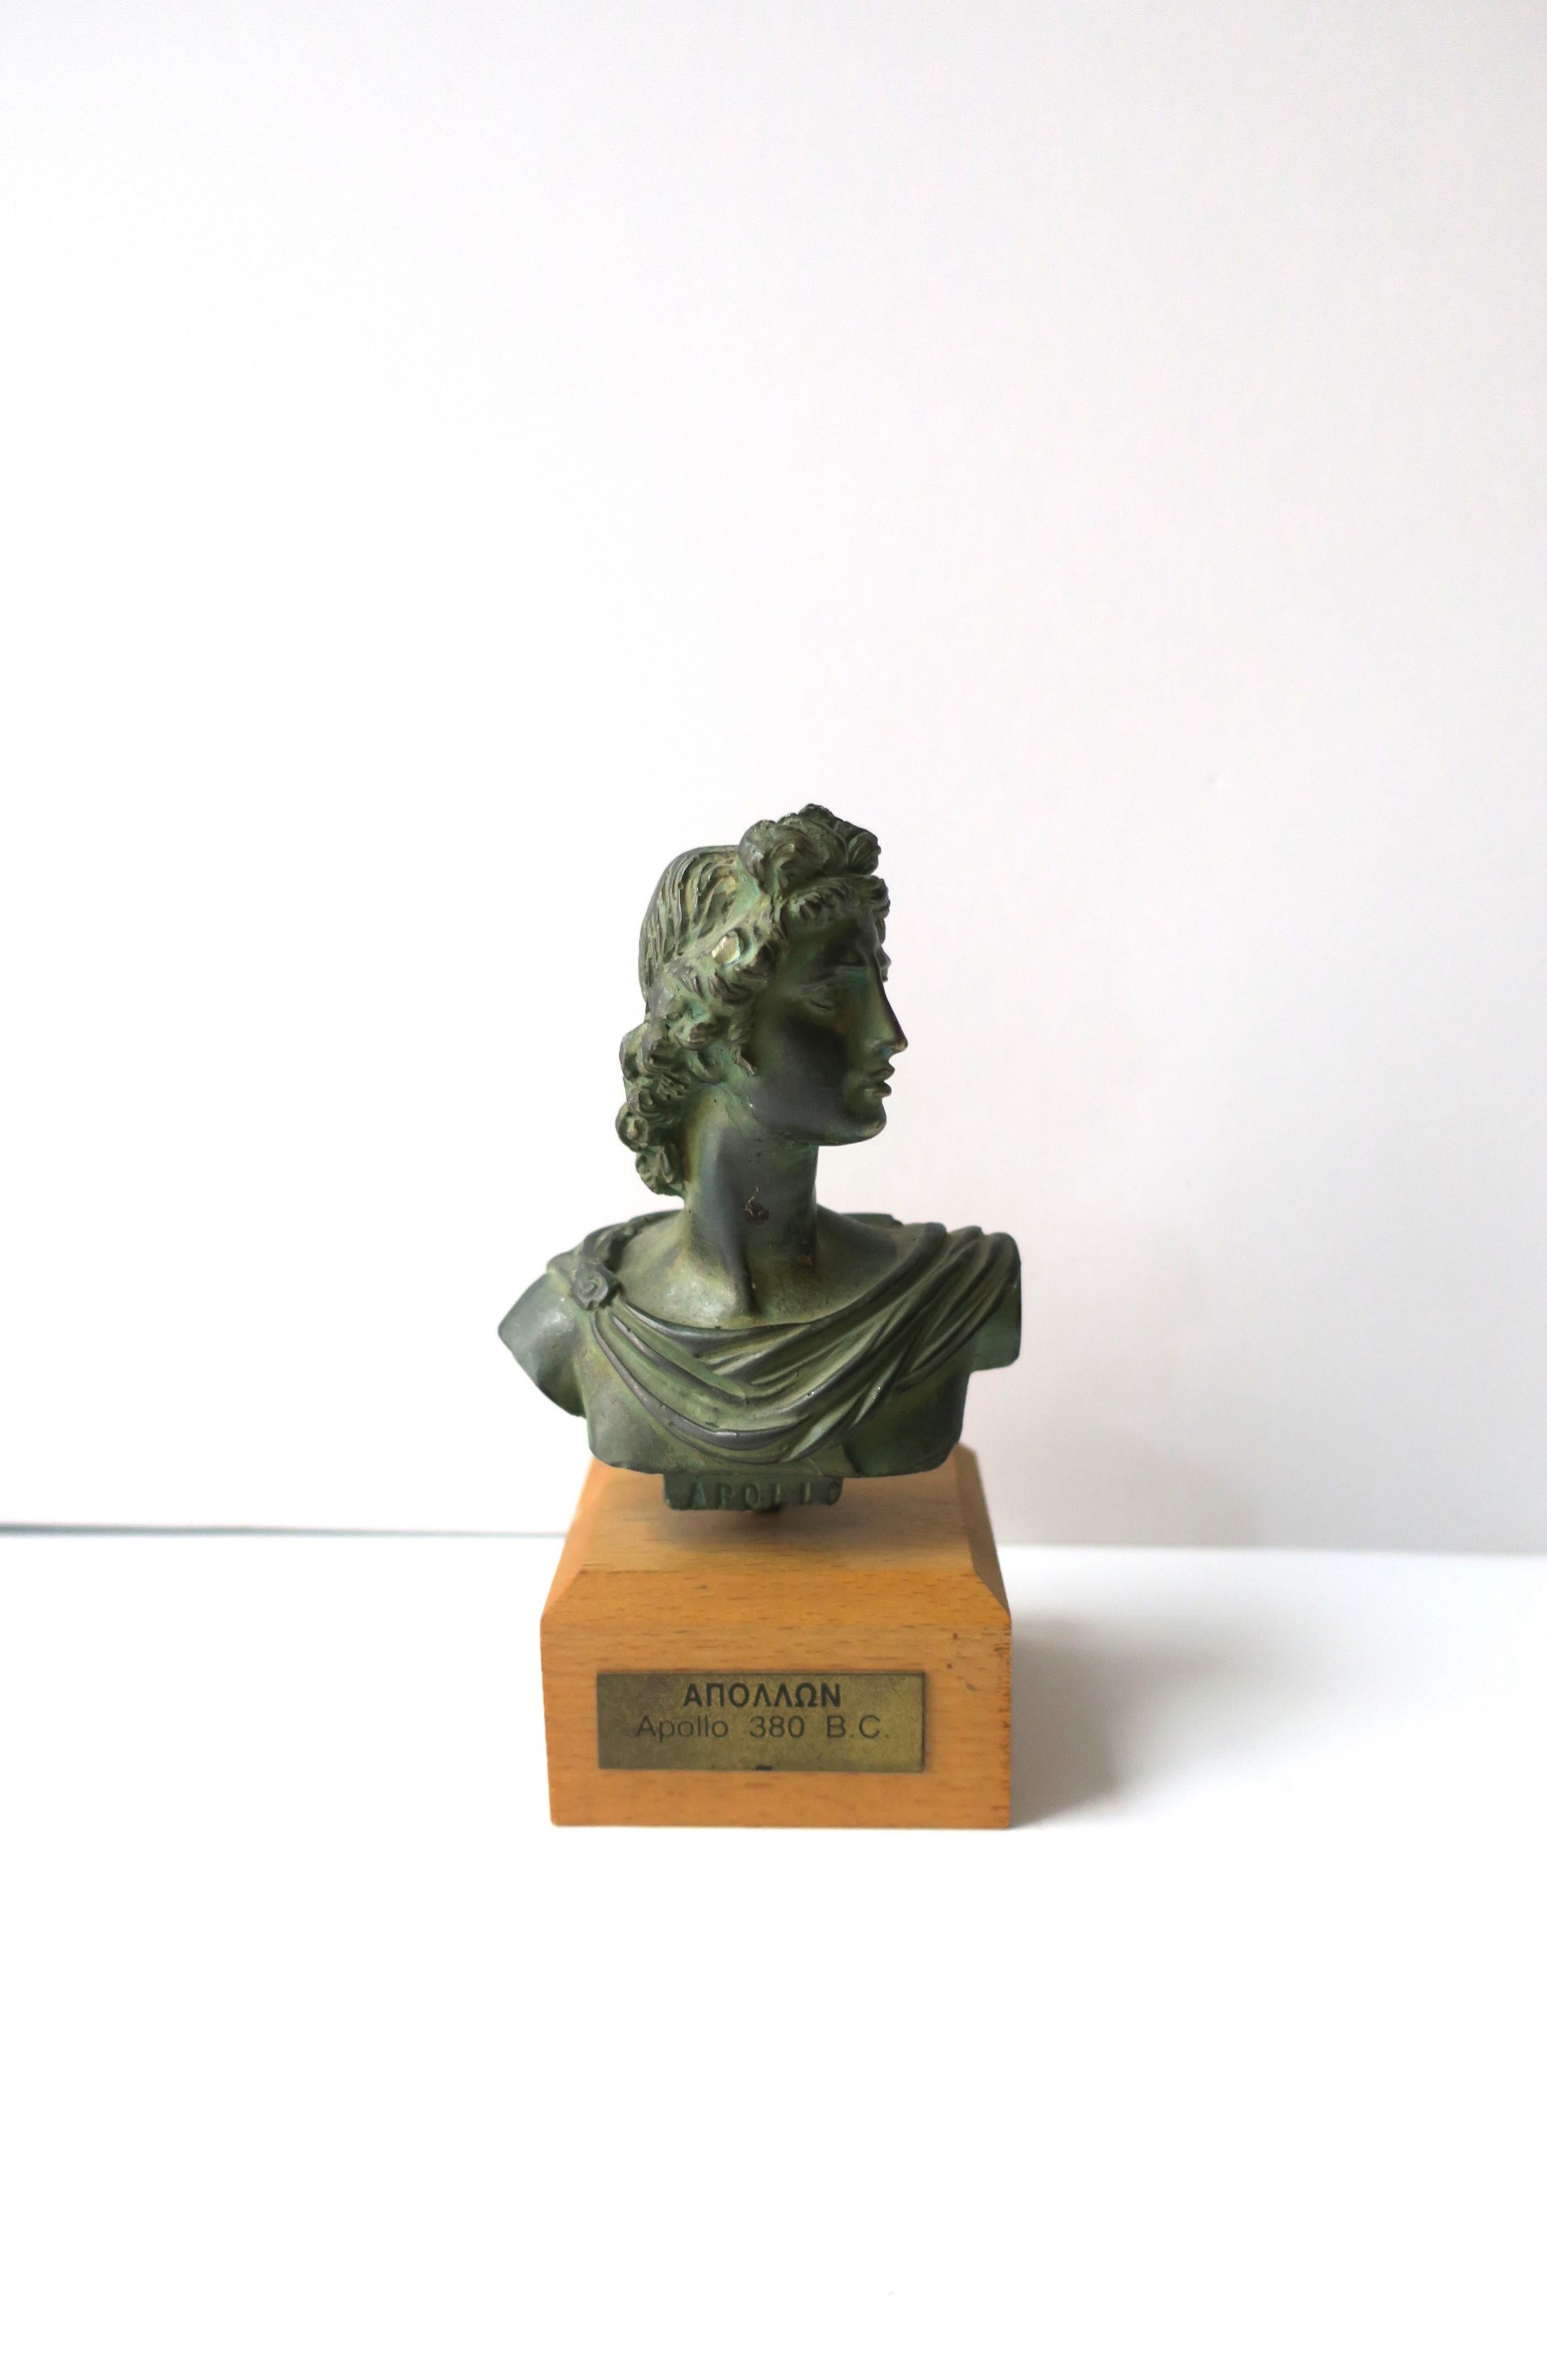 A small replica of the sculpture bust of Apollo in the Greco-Roman style, circa mid-20th century, Greece. A small replica of Apollo with a Verde green hue on a wood base. A great decorative object for a desk, shelf, table, home library, etc. With